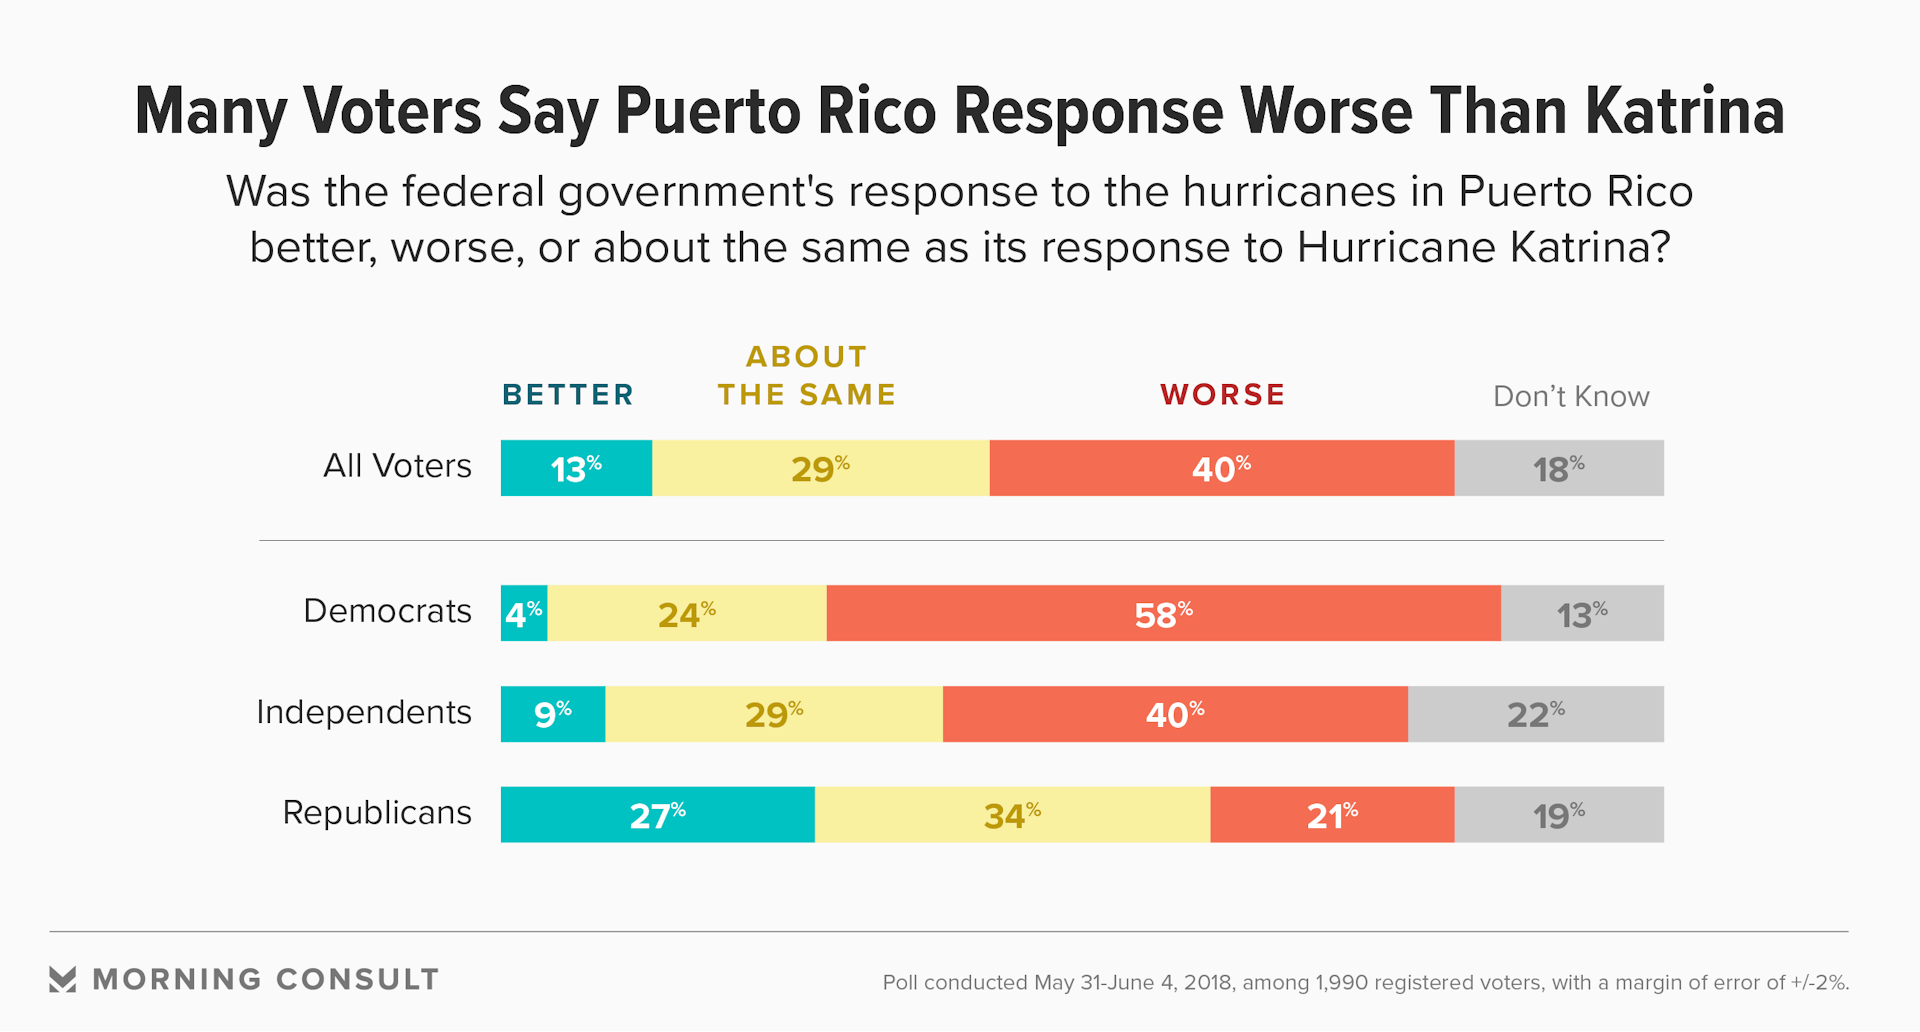 Bar charts showing voter opinions of response of U.S. government to Hurricane Maria in Puerto Rico compared to that of Hurricane Katrina